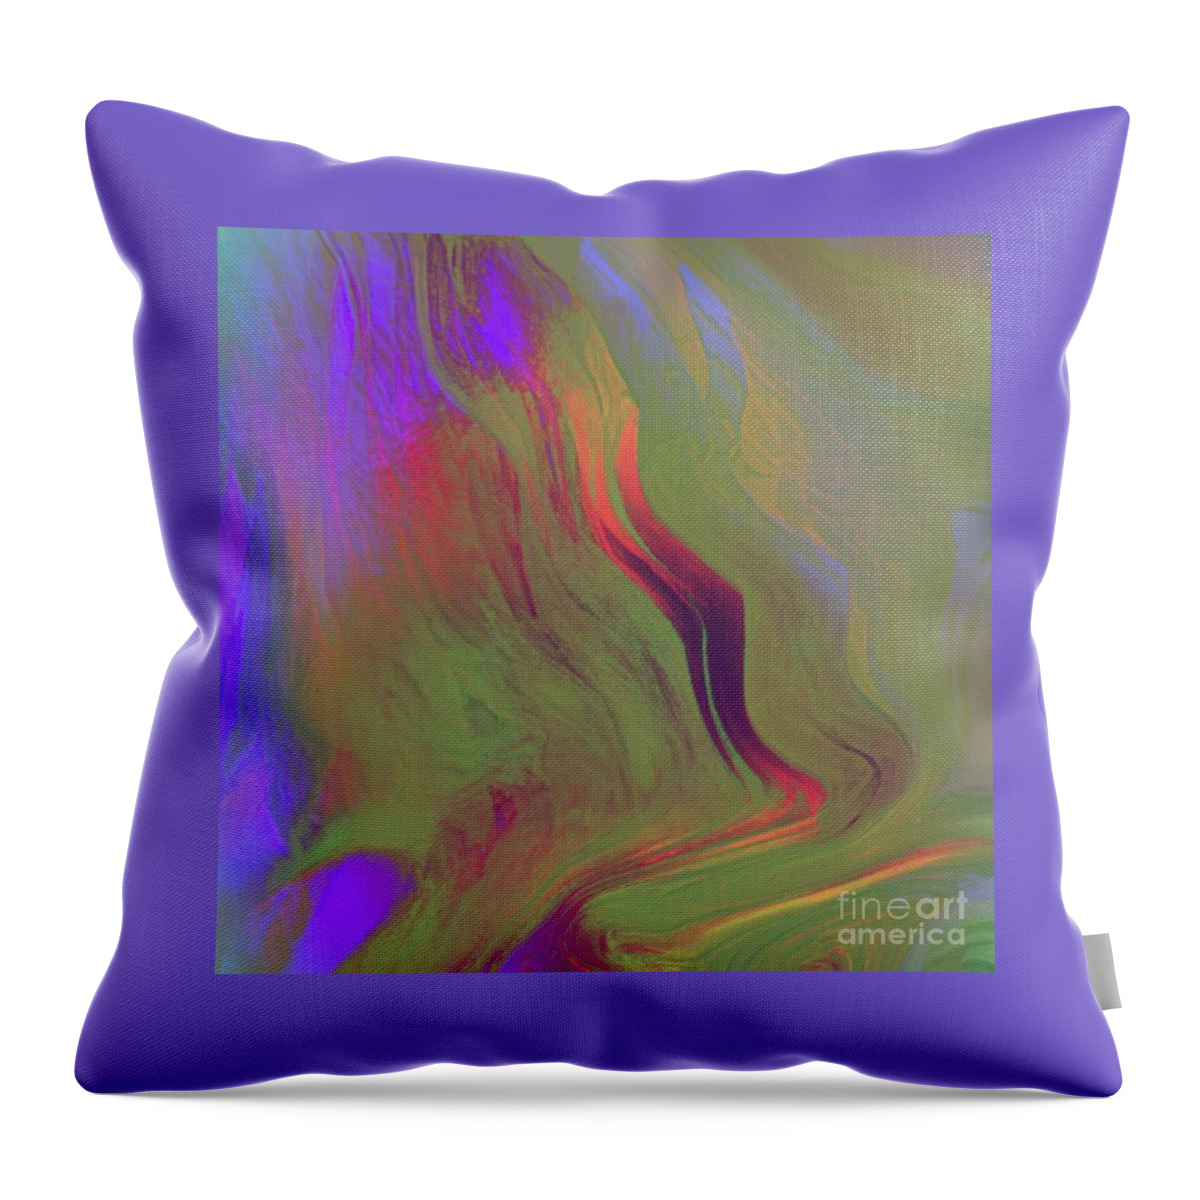  Throw Pillow featuring the digital art Intrigued by Glenn Hernandez